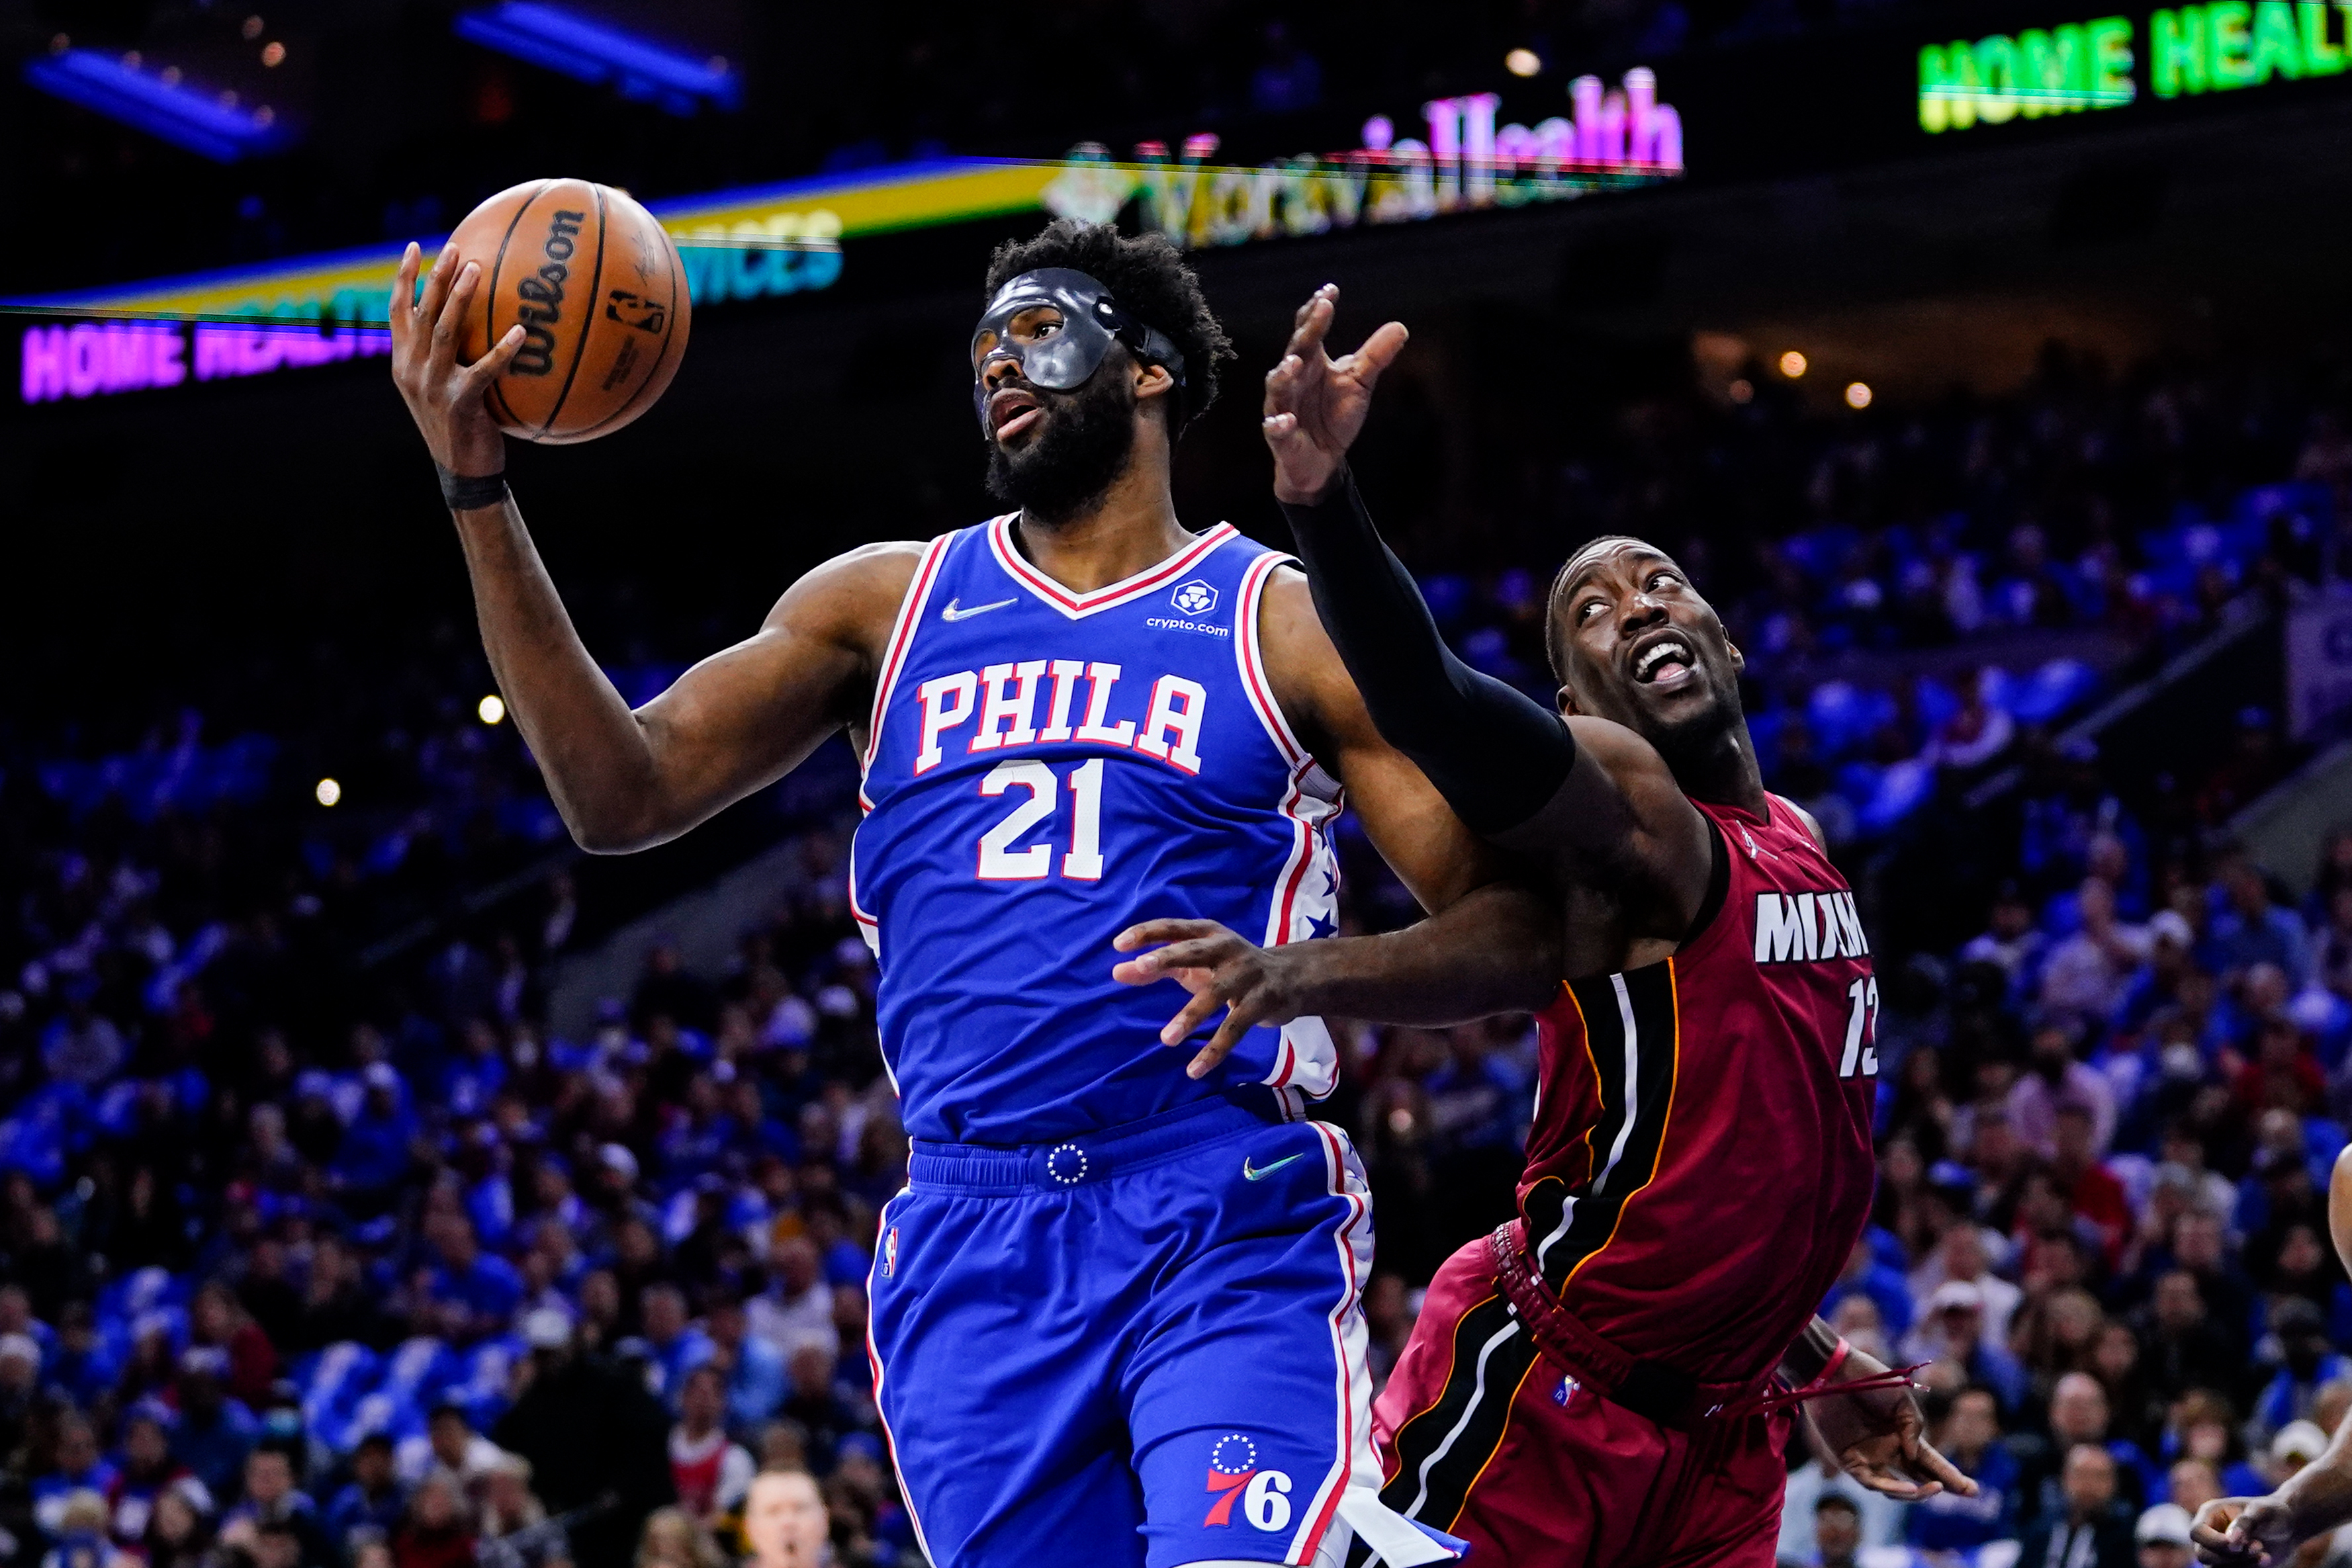 Order restored in Philly, at least for a day, as Phils and Sixers